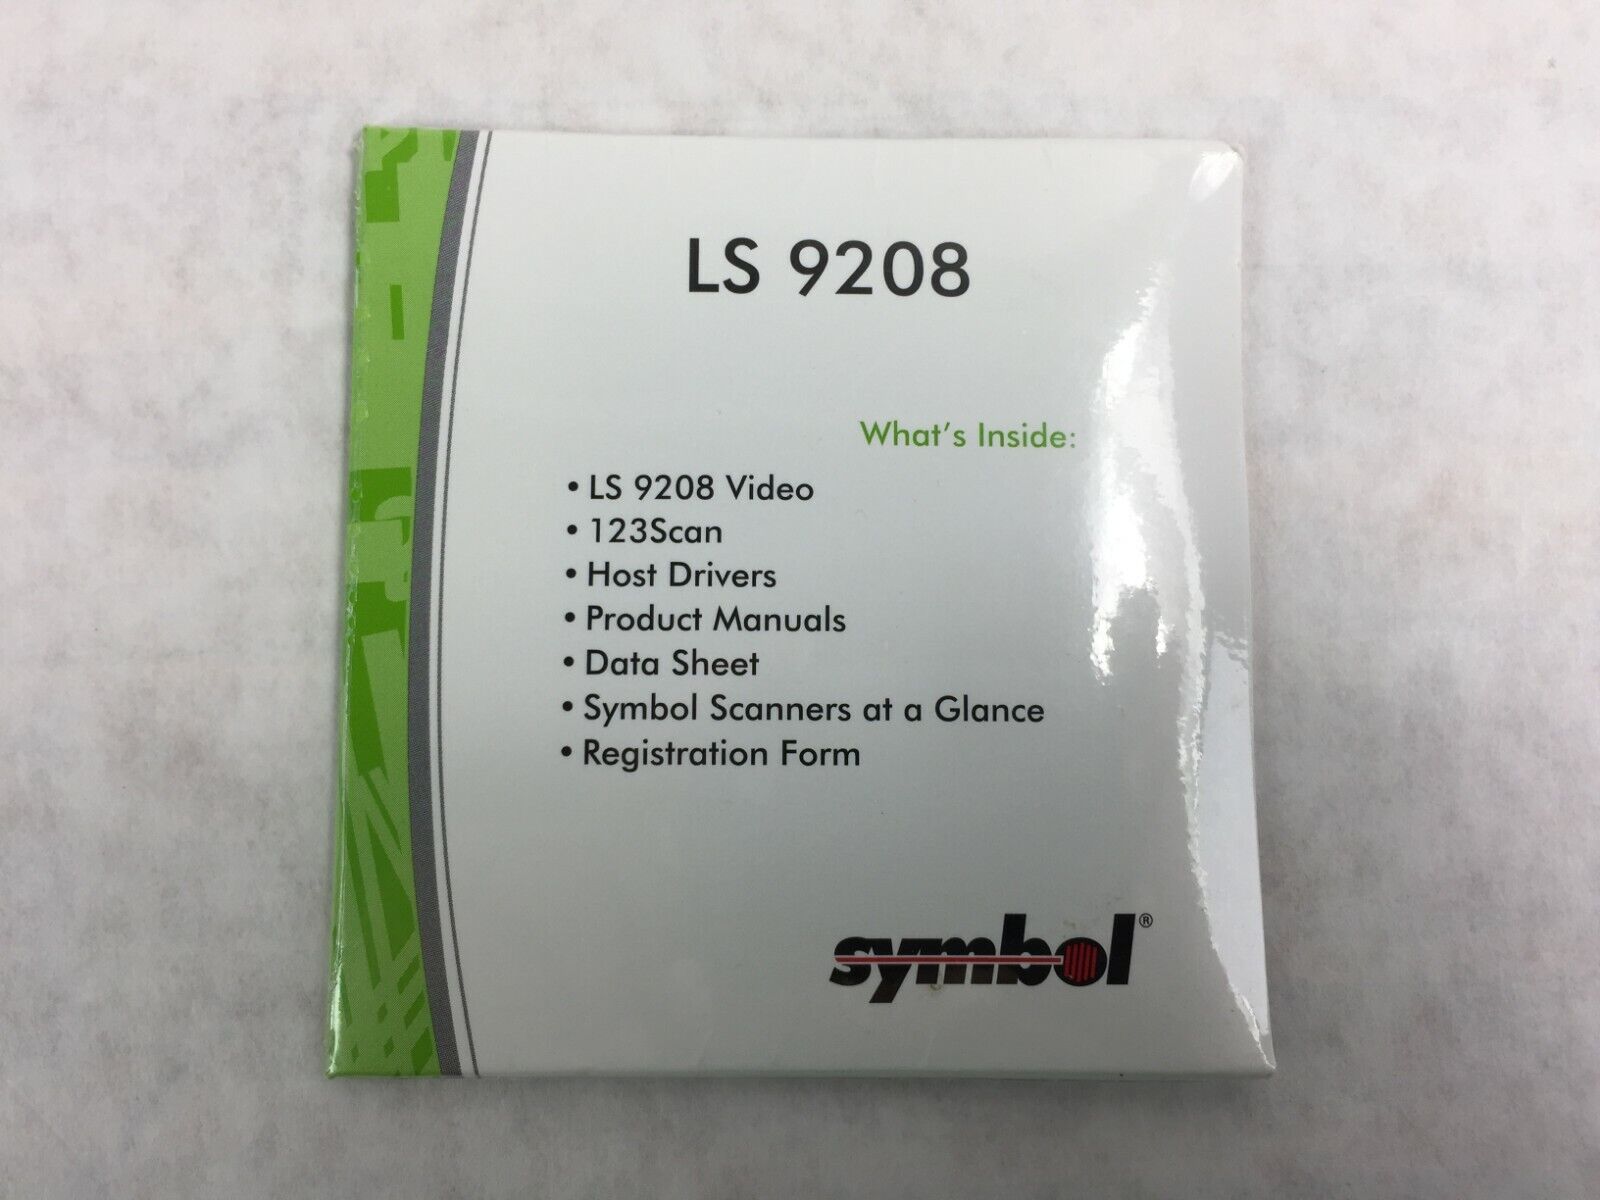 Genuine Symbol Technologies CD ONLY for LS9208    1PSW-61232-01   Factory Sealed